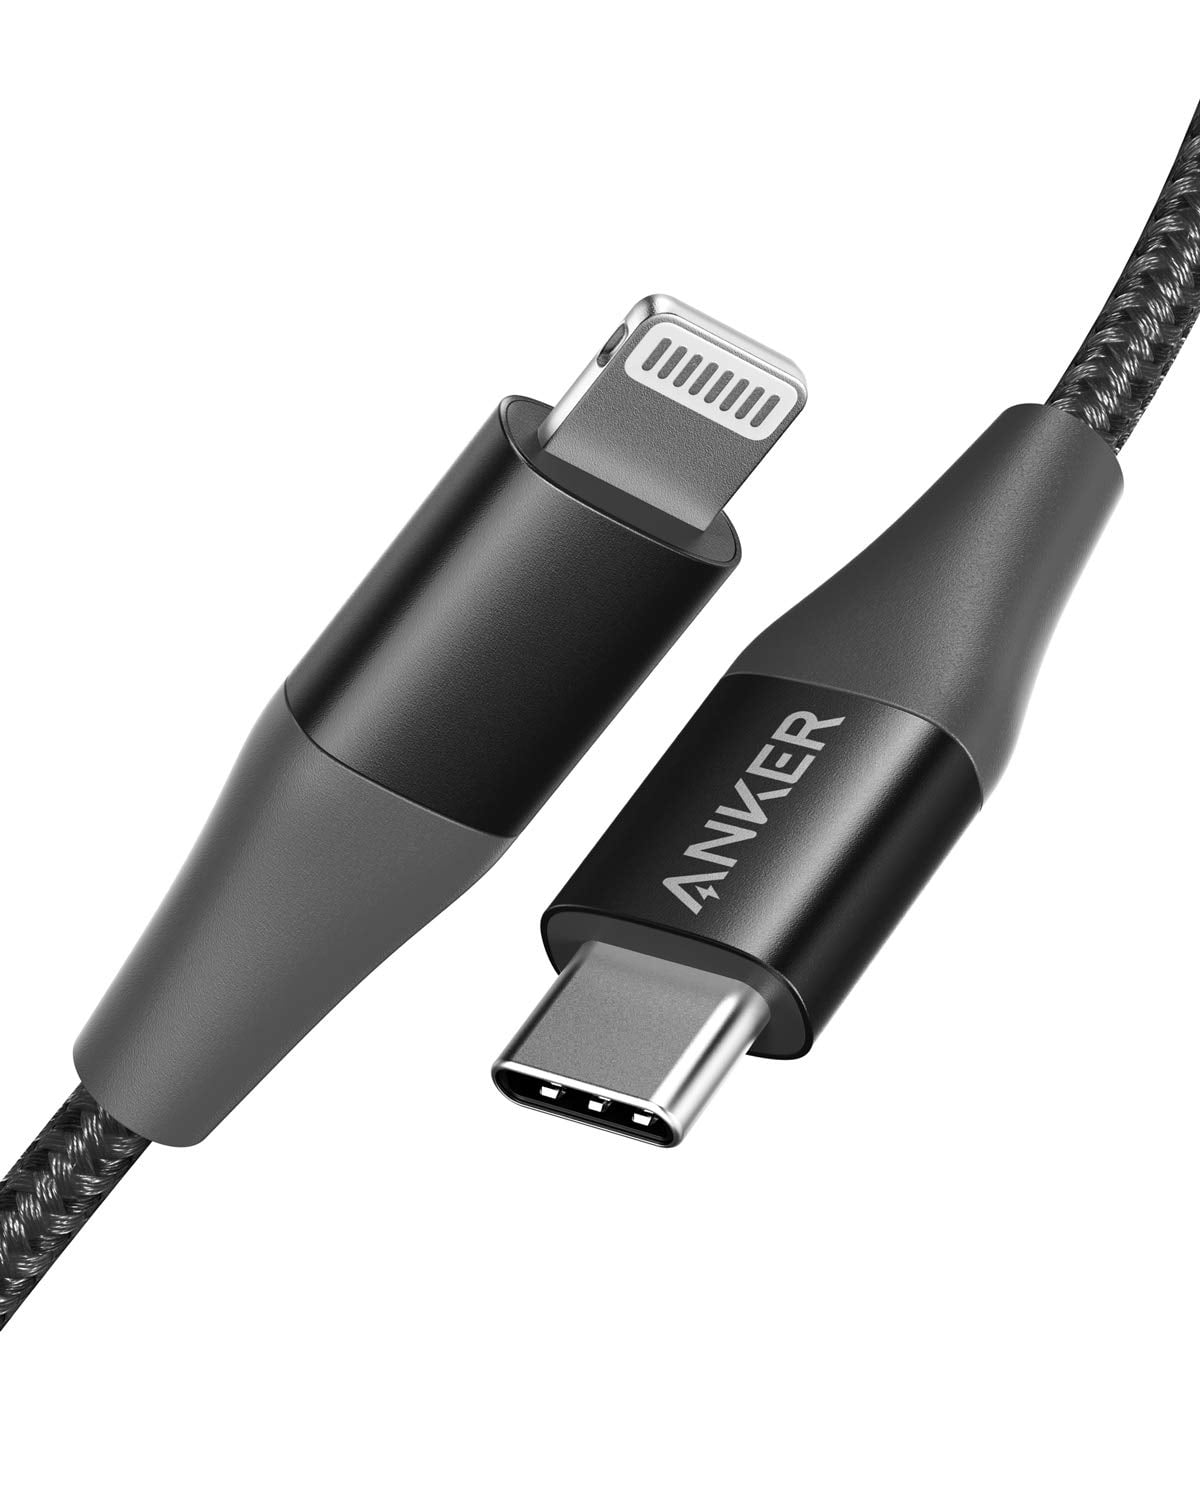 MFi Certified iPhone Charger Black Basics Lightning to USB A Cable 6-Foot